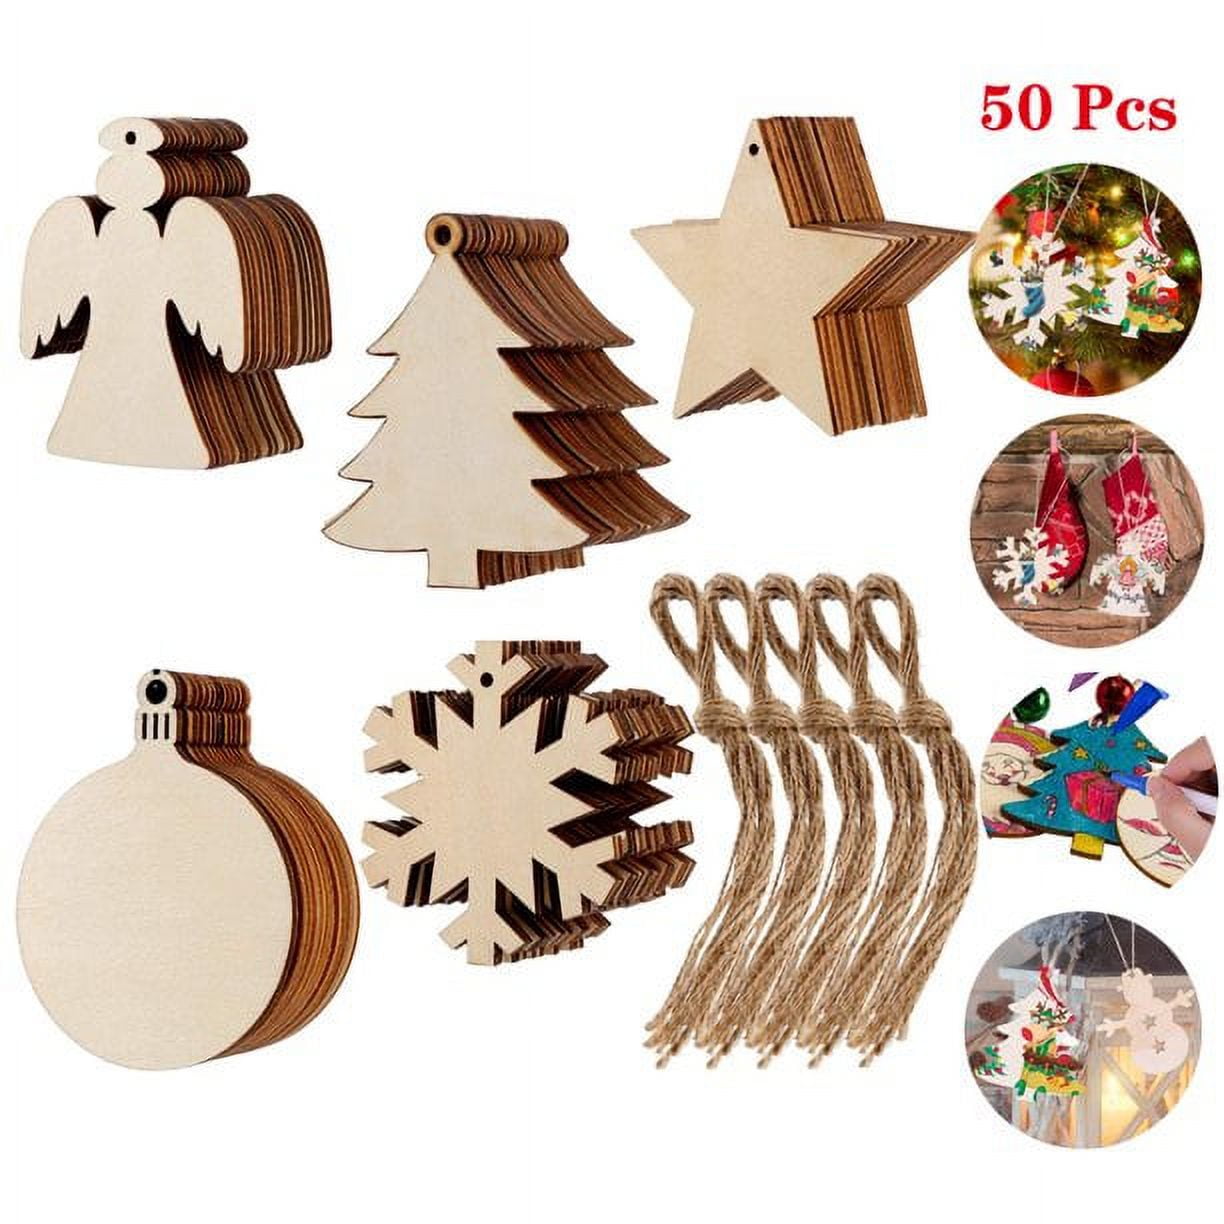 Unfinished Wooden Christmas Ornaments, 25pcs DIY Christmas Crafts for Kids, Natural Wood Cutout Kit with Twines Pom-Poms Googly Eyes, Predrilled